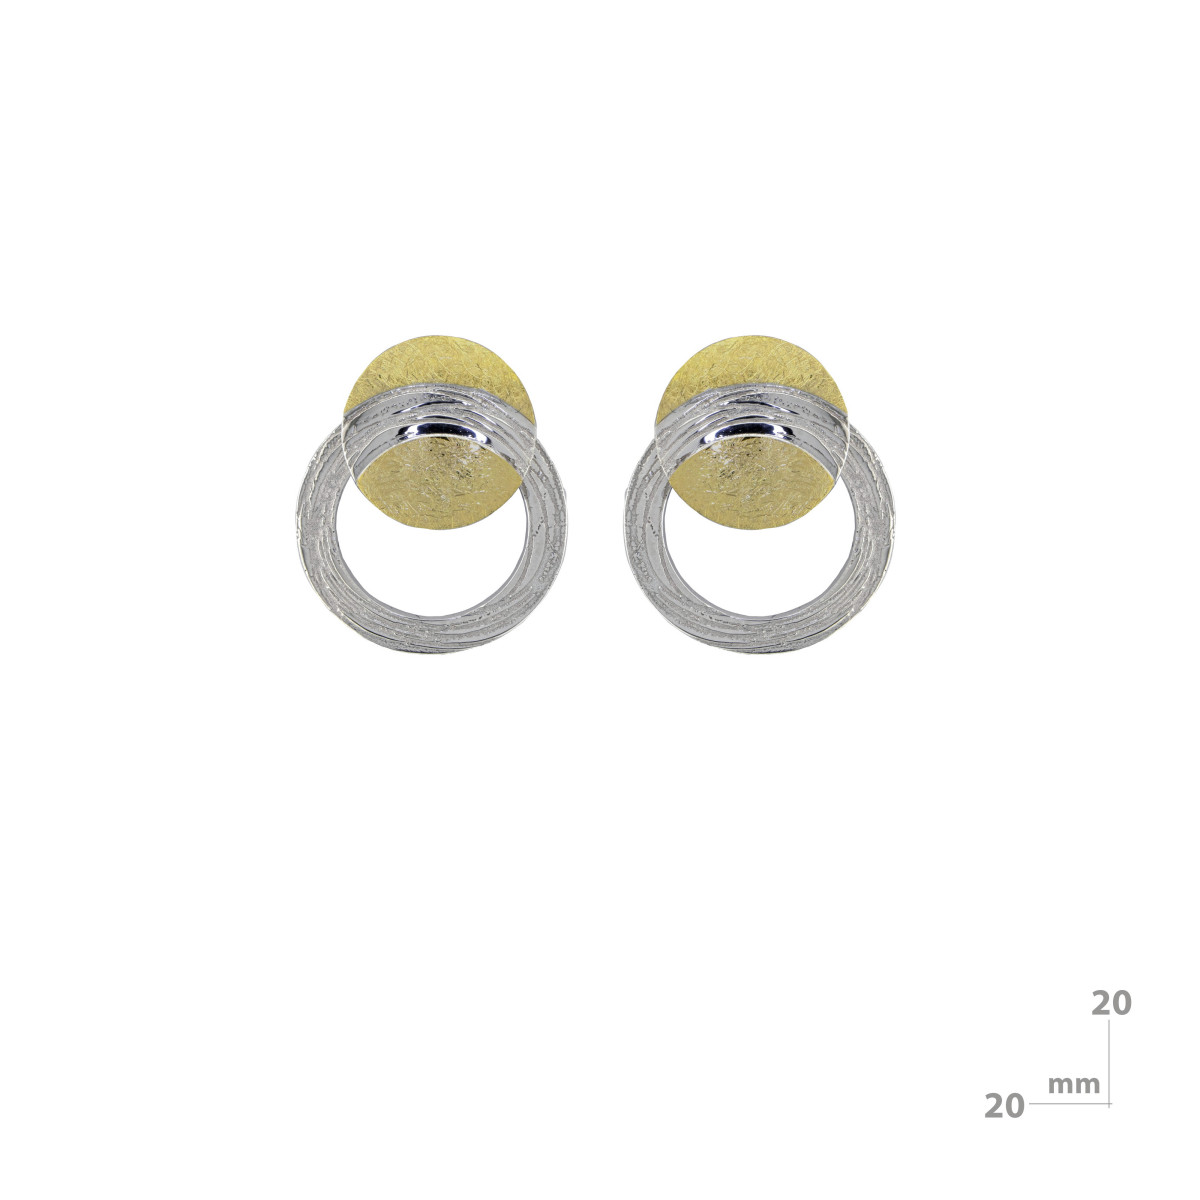 Earrings made of silver and 18k gold